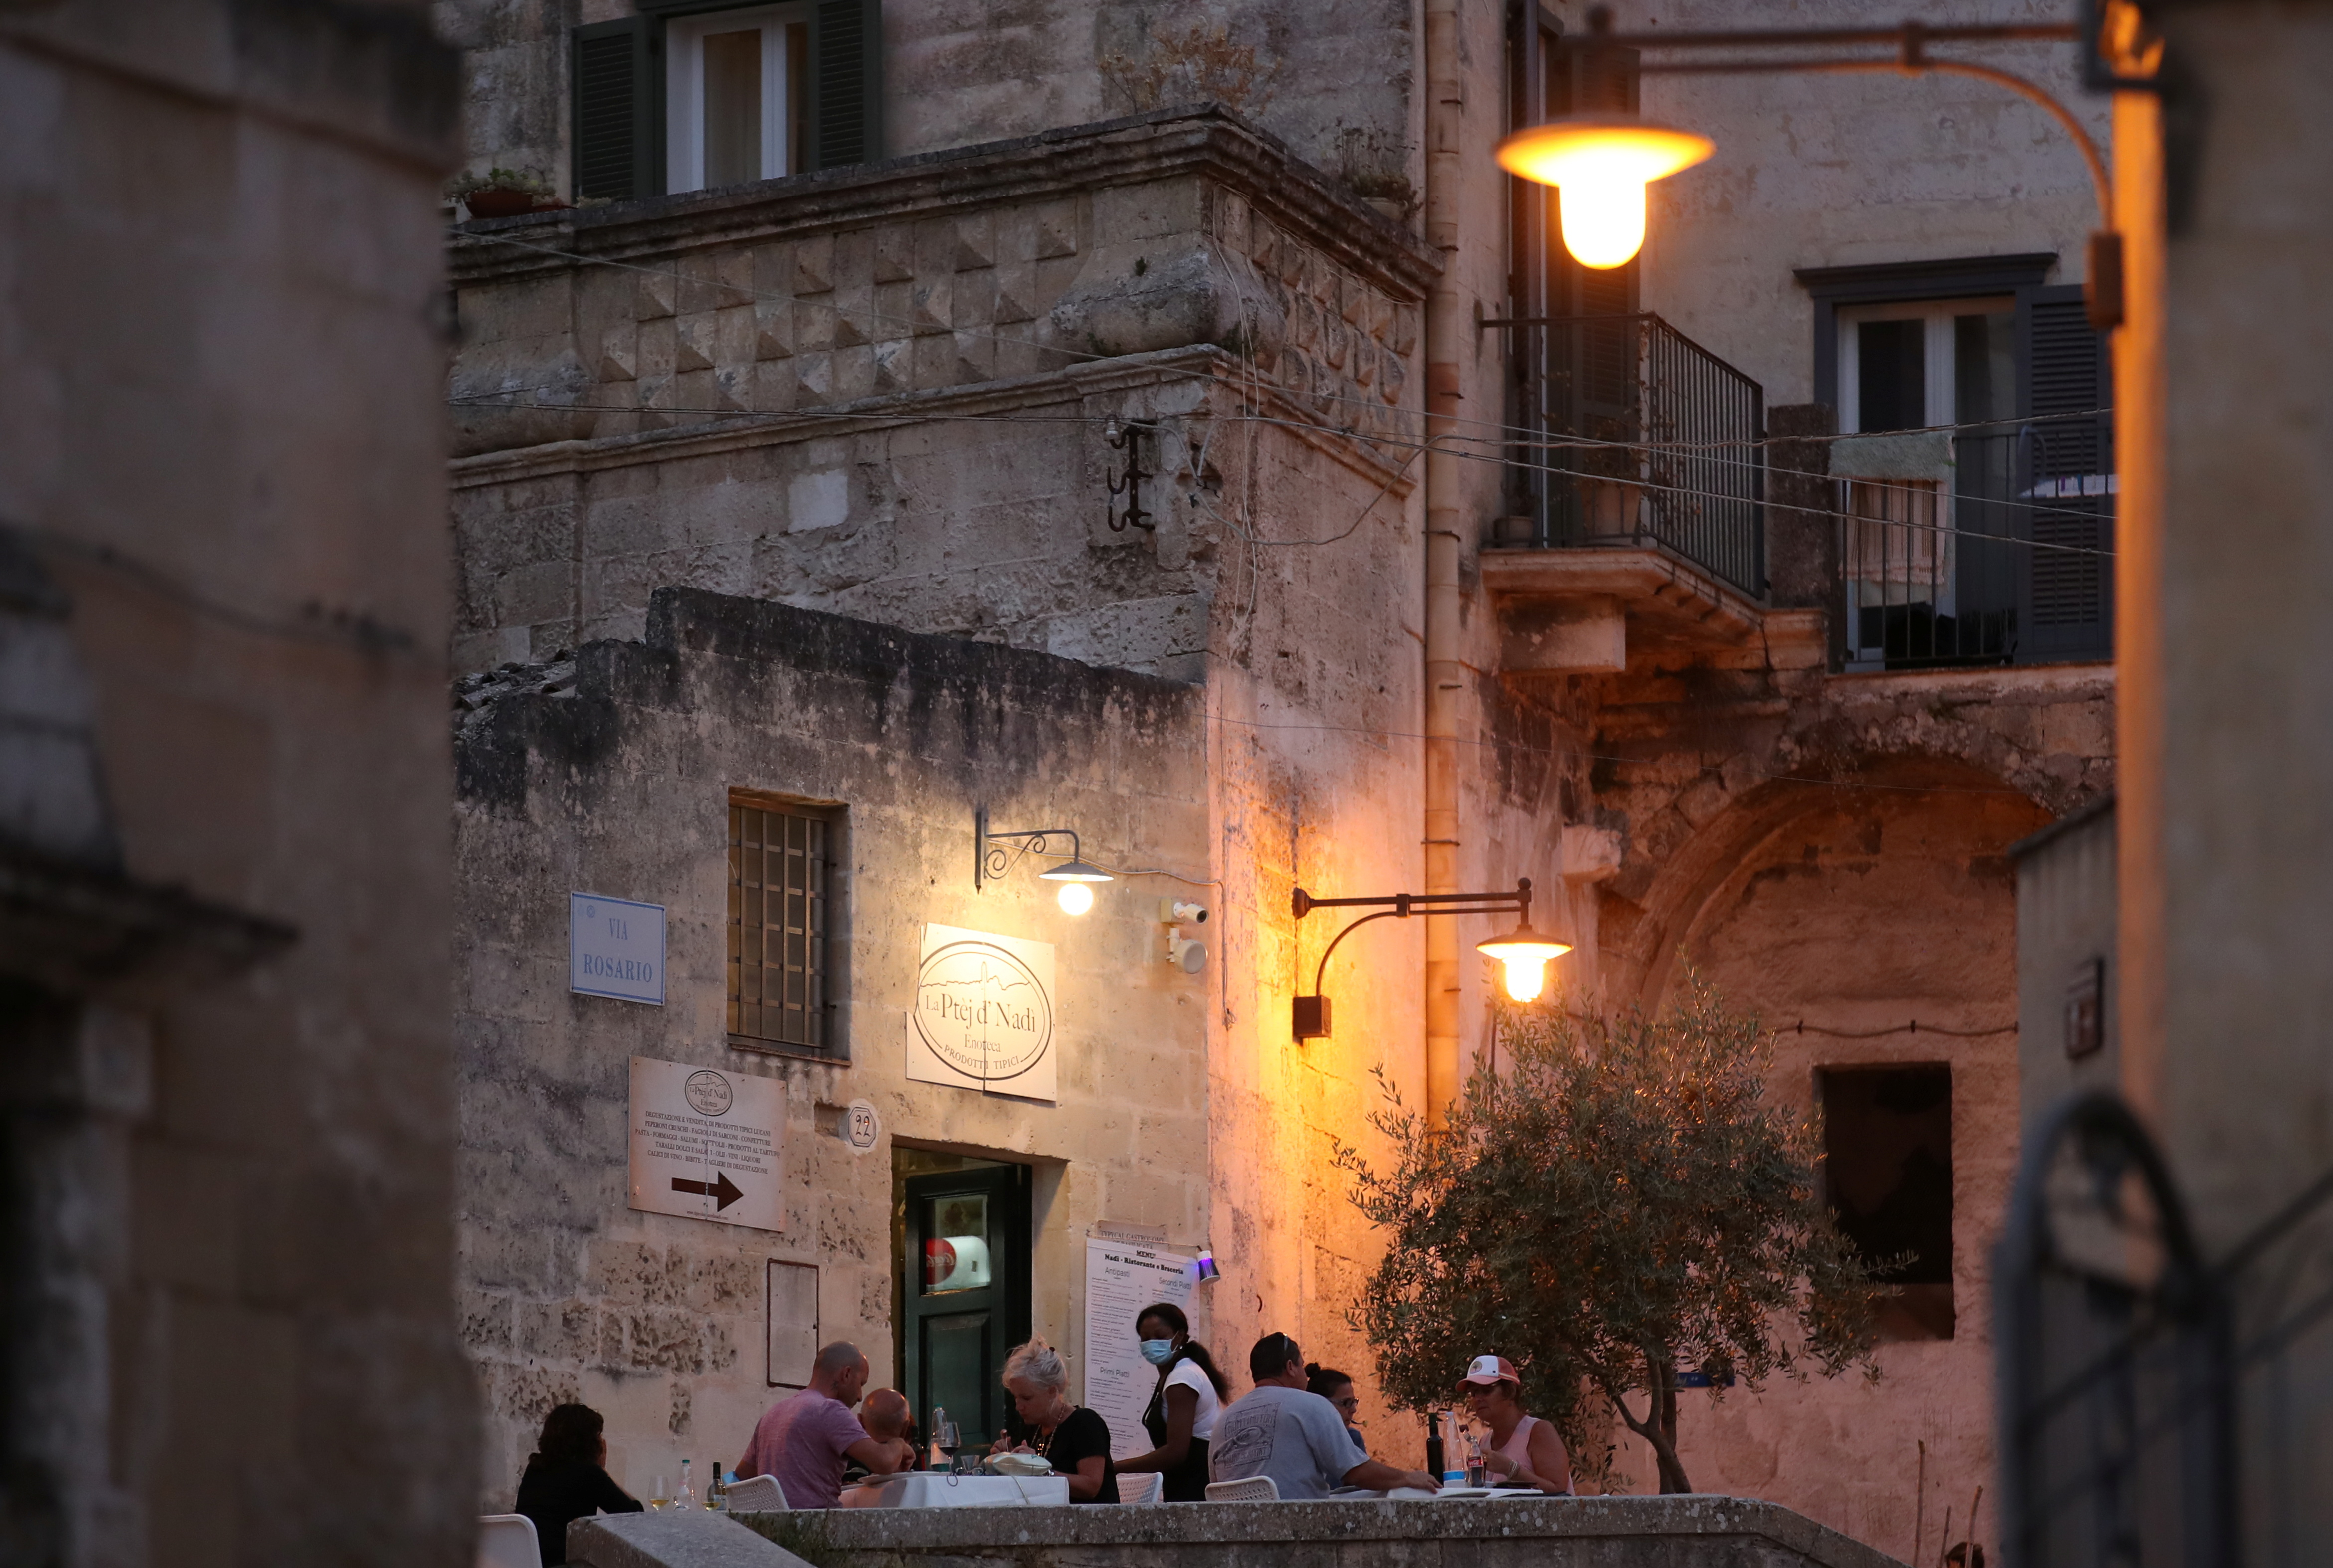 People enjoy the evening at a restaurant in Matera, Italy